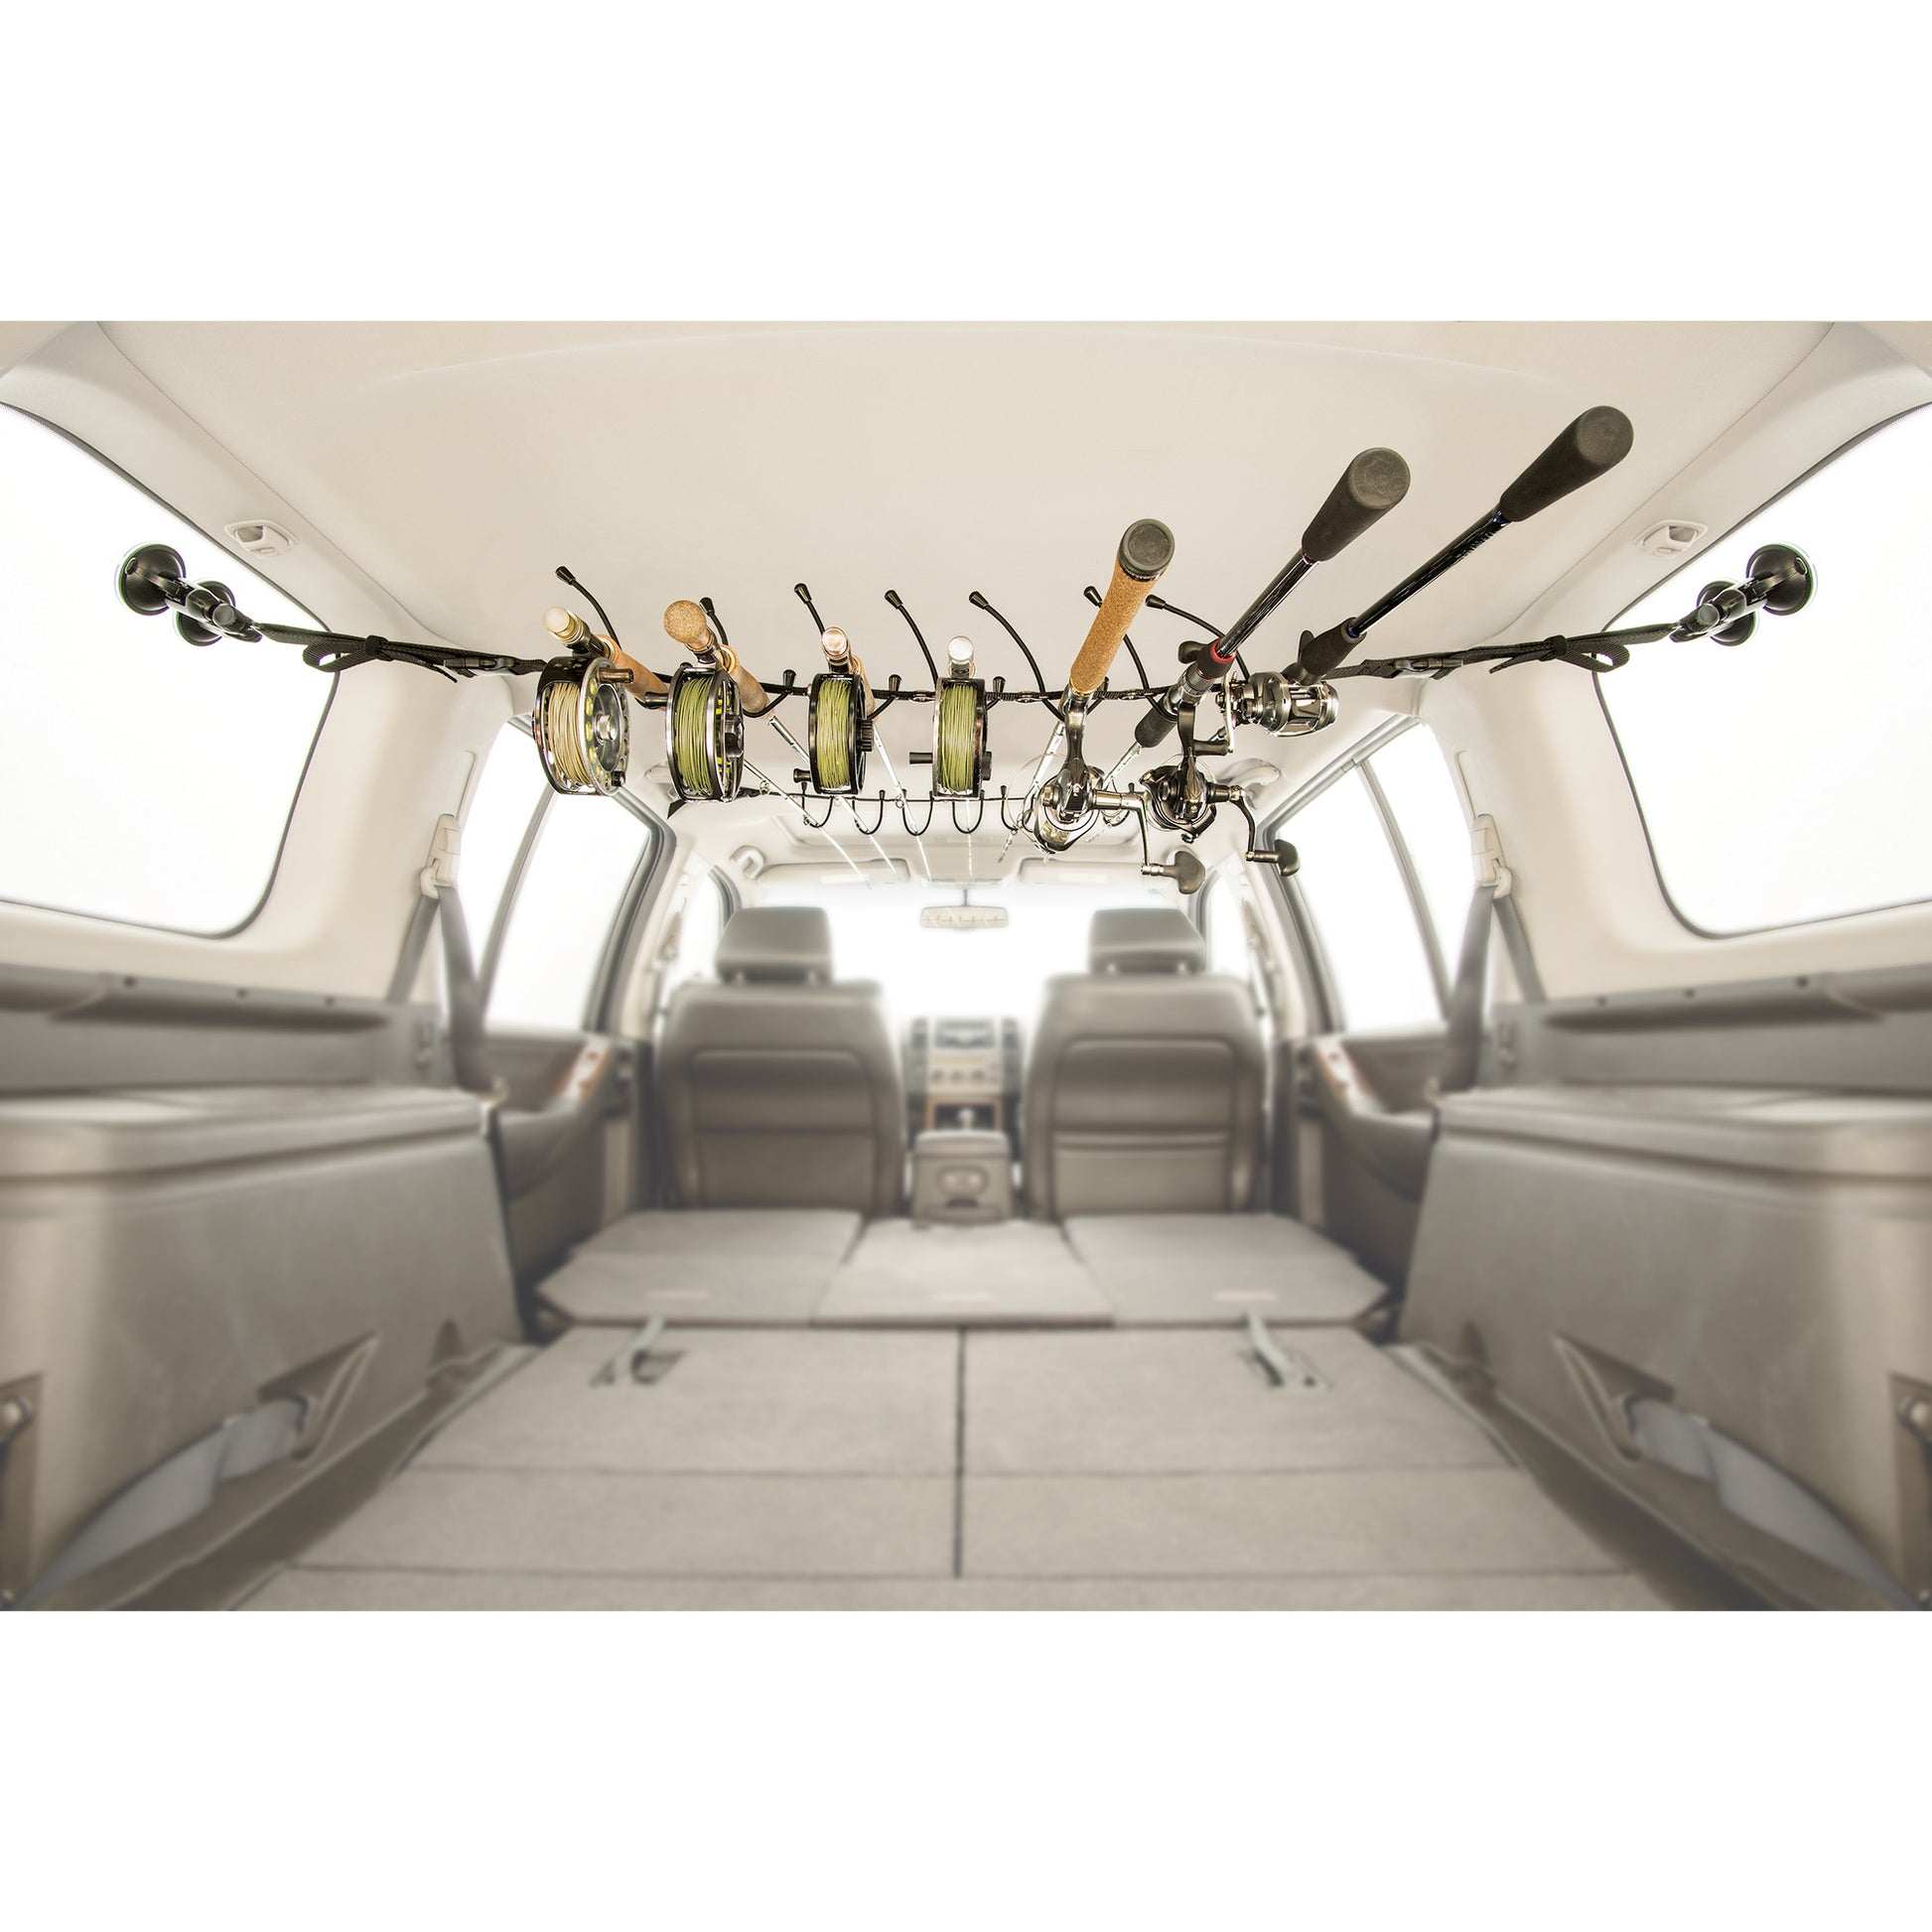 Rod Rack Smith Creek Fly Fishing Tools And Gear, 40% OFF